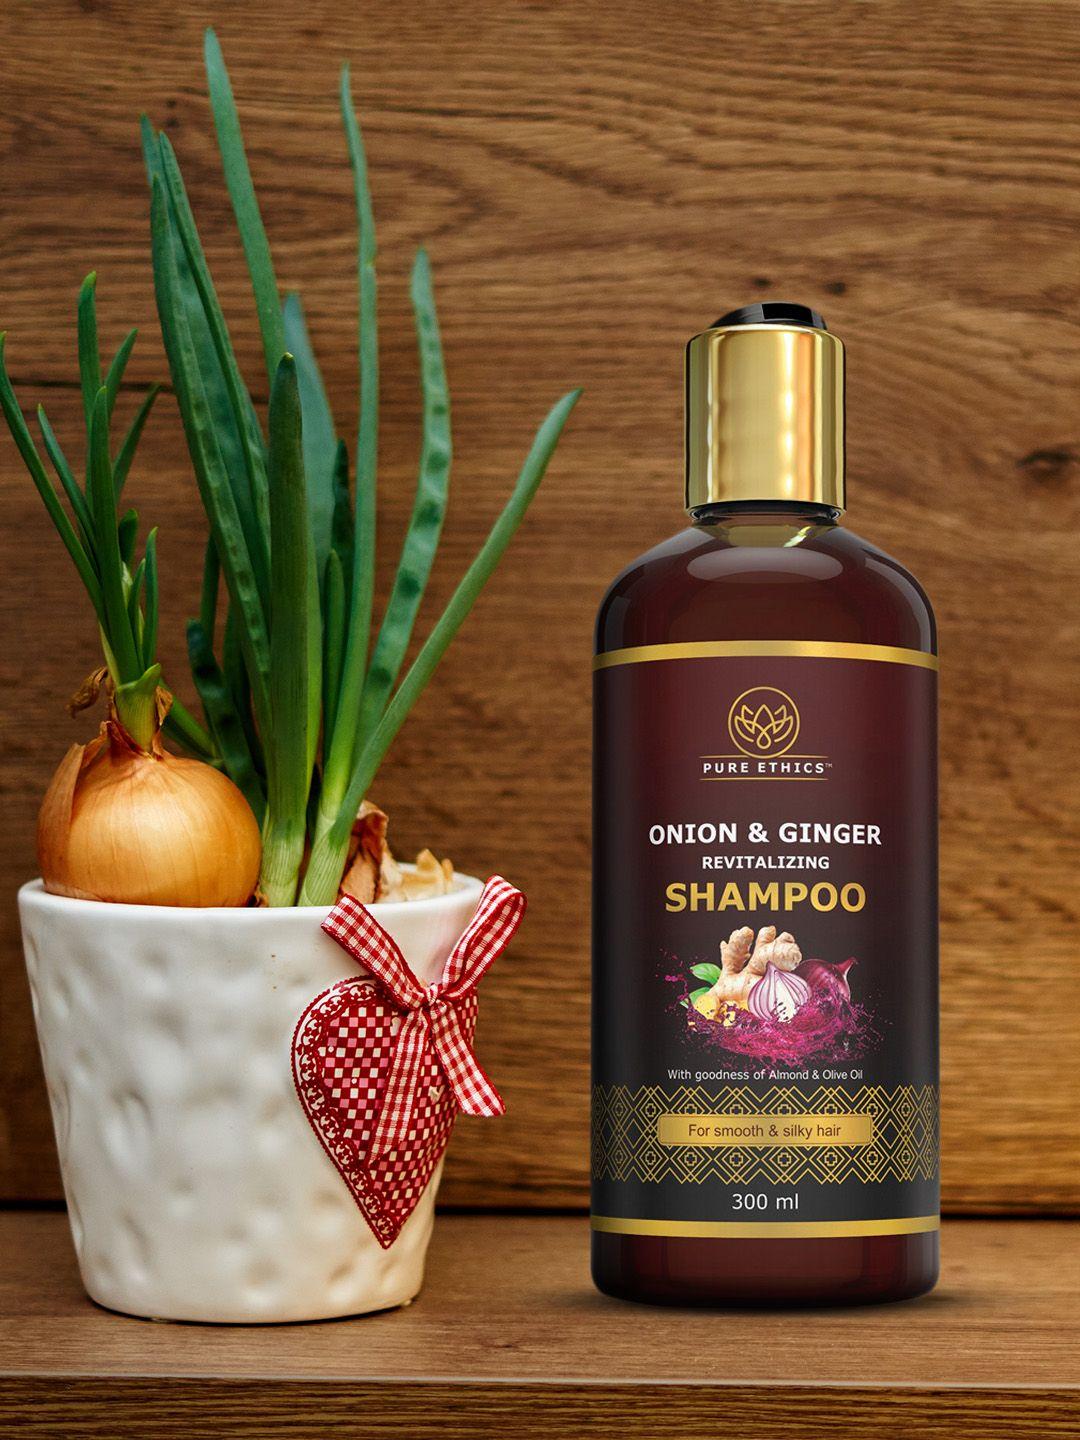 pure ethics onion shampoo with ginger - 300 ml